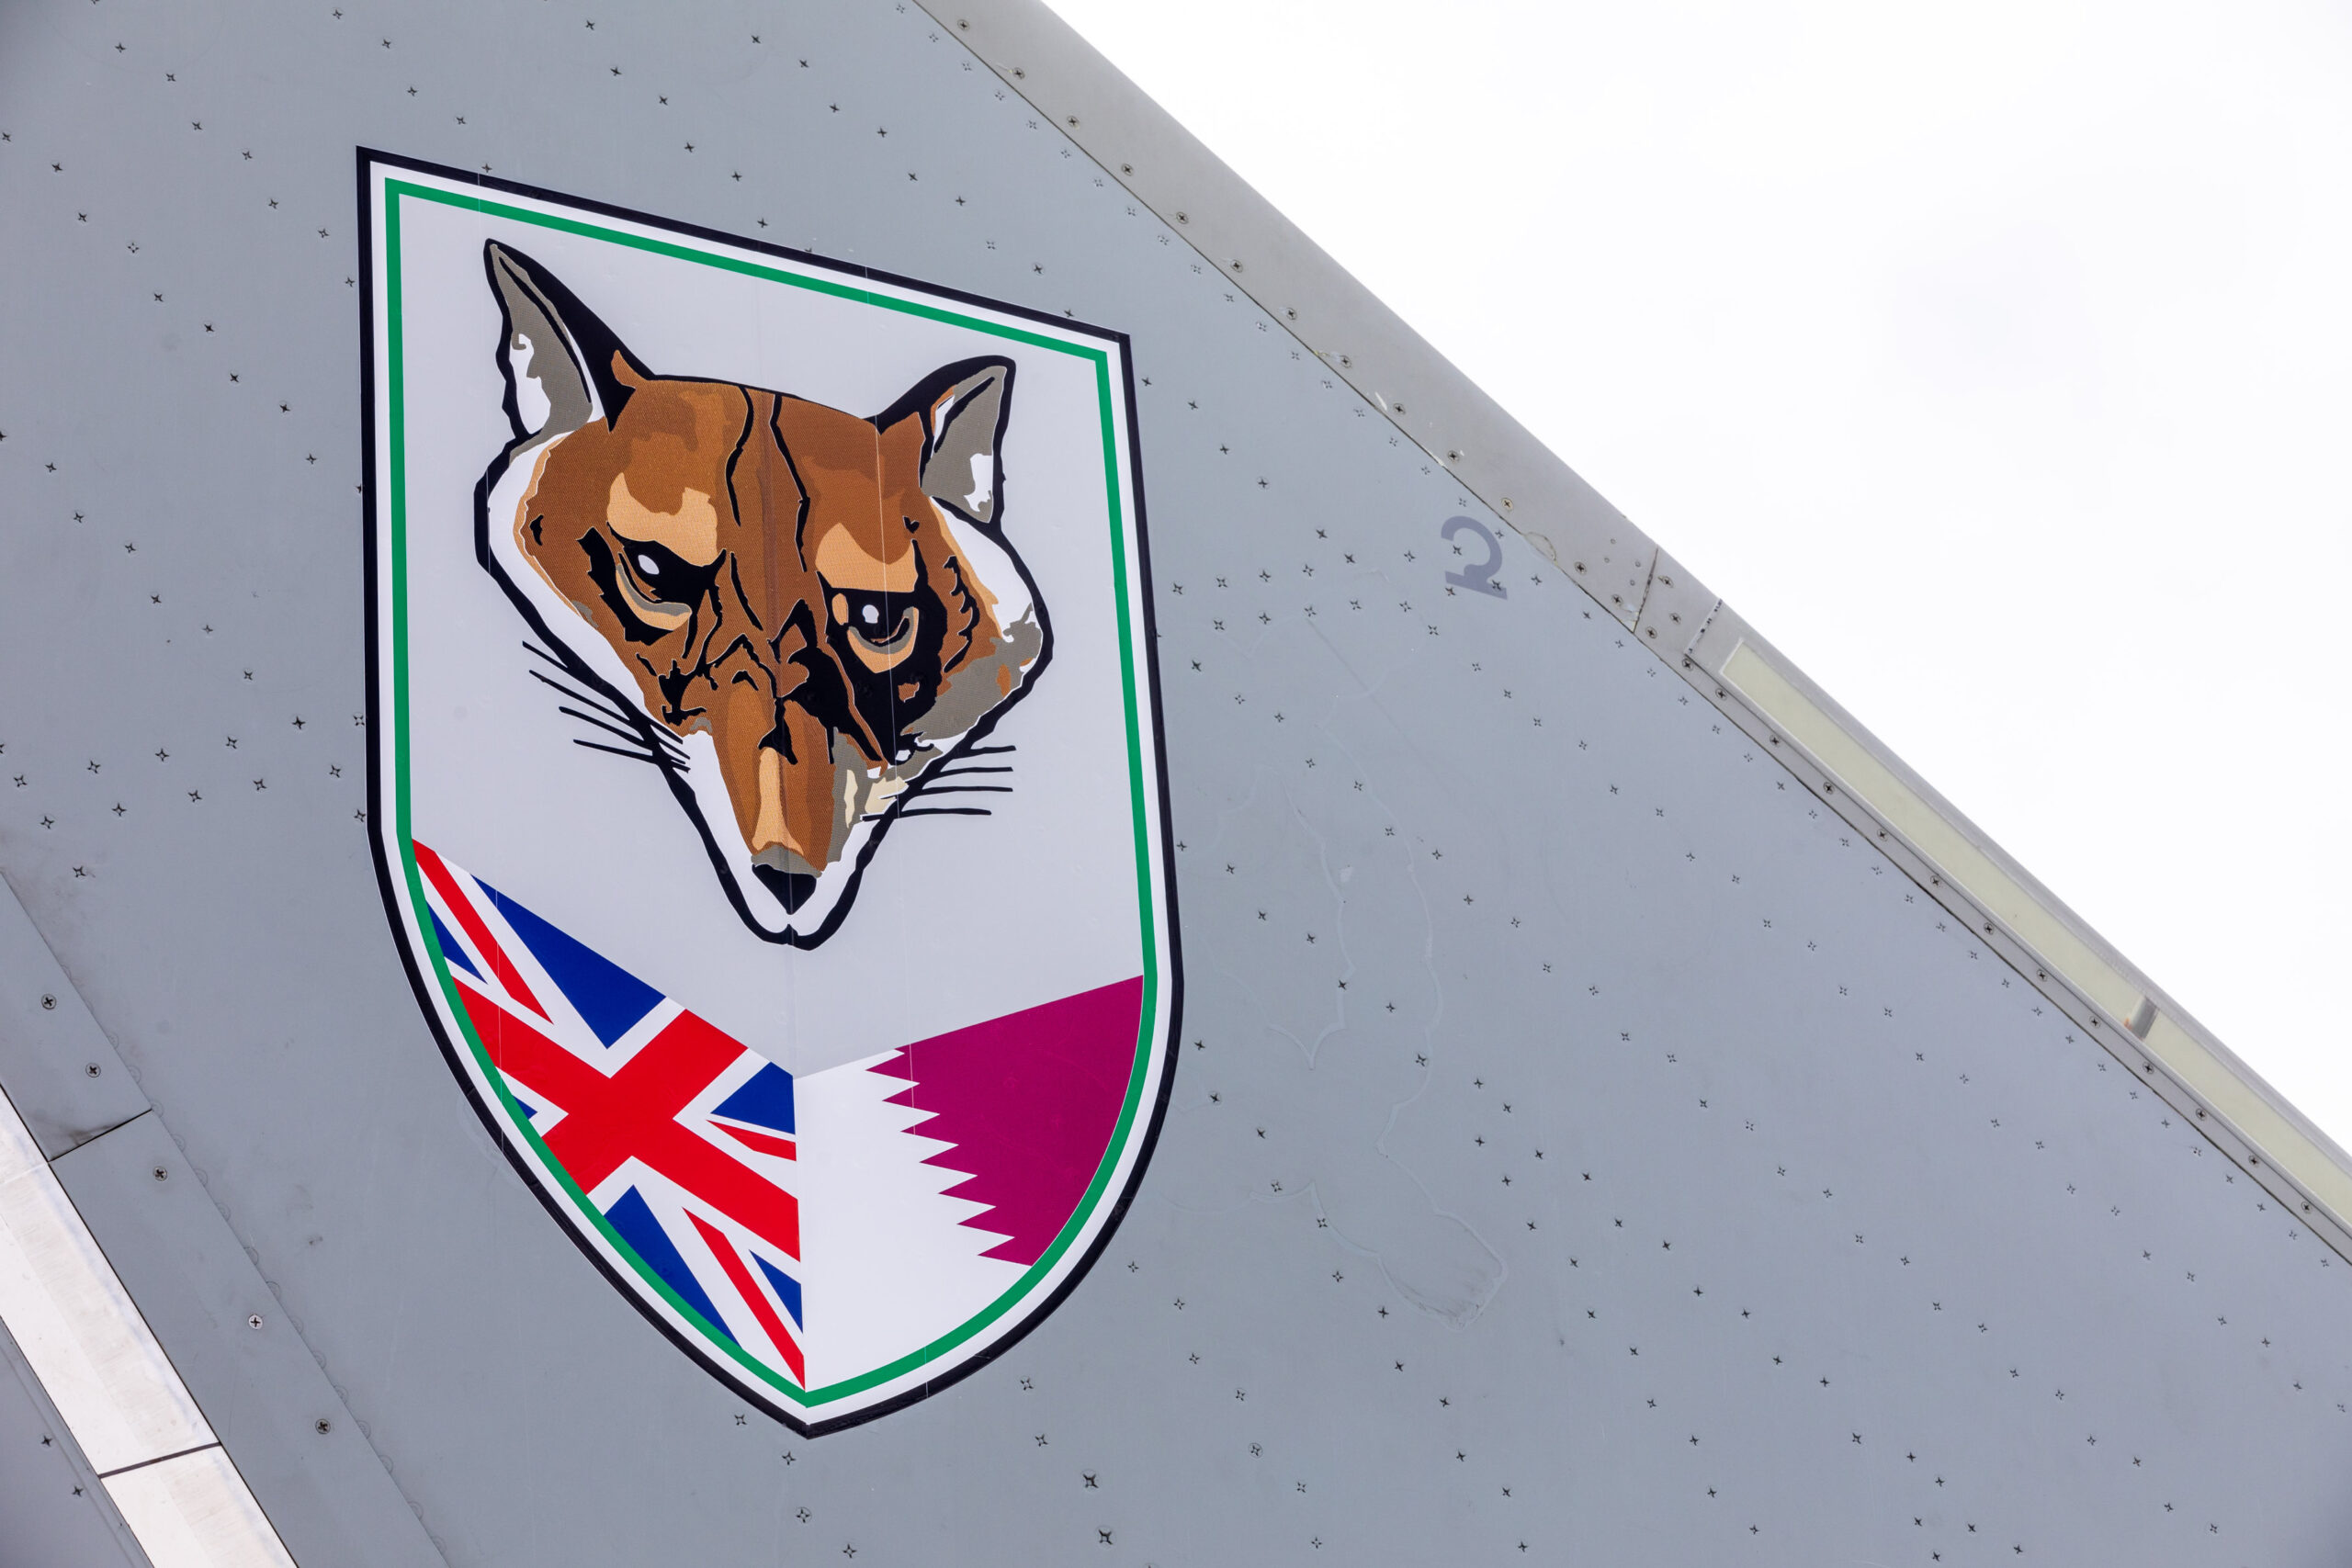 The Royal Air Force and Qatar Emiri Air Force (QEAF) Typhoon Squadron, known as No.12 Squadron, have marked an important milestone as they commenced flying as a Joint Squadron today.Based at RAF Coningsby, and later in Qatar, No.12 Squadron is a unique initiative between the UK and Qatar and will provide the QEAF with valuable experience operating the Typhoon as they prepare for their first delivery of the aircraft. Due to be delivered in 2022, the aircraft are part of a £5.1 billion deal between BAE Systems and the Government of Qatar. The flags of both nations were raised at RAF Coningsby today as Typhoons with new Squadron markings flew for the first time, signalling the Squadron’s readiness to train pilots and ground crew from both air forces. The UK has a long history of working with international partners into our Armed Forces, with such defence engagement recognised as key to strengthening partnerships and promoting our national interest. However, No. 12 Squadron is the first Joint Squadron in the RAF since the Second World War and Battle of Britain. The Joint Squadron was stood up on 24 July 2018 and will drive closer collaboration between the RAF and QEAF, putting our bilateral security and defence relationship on a long-term and sustainable footing.